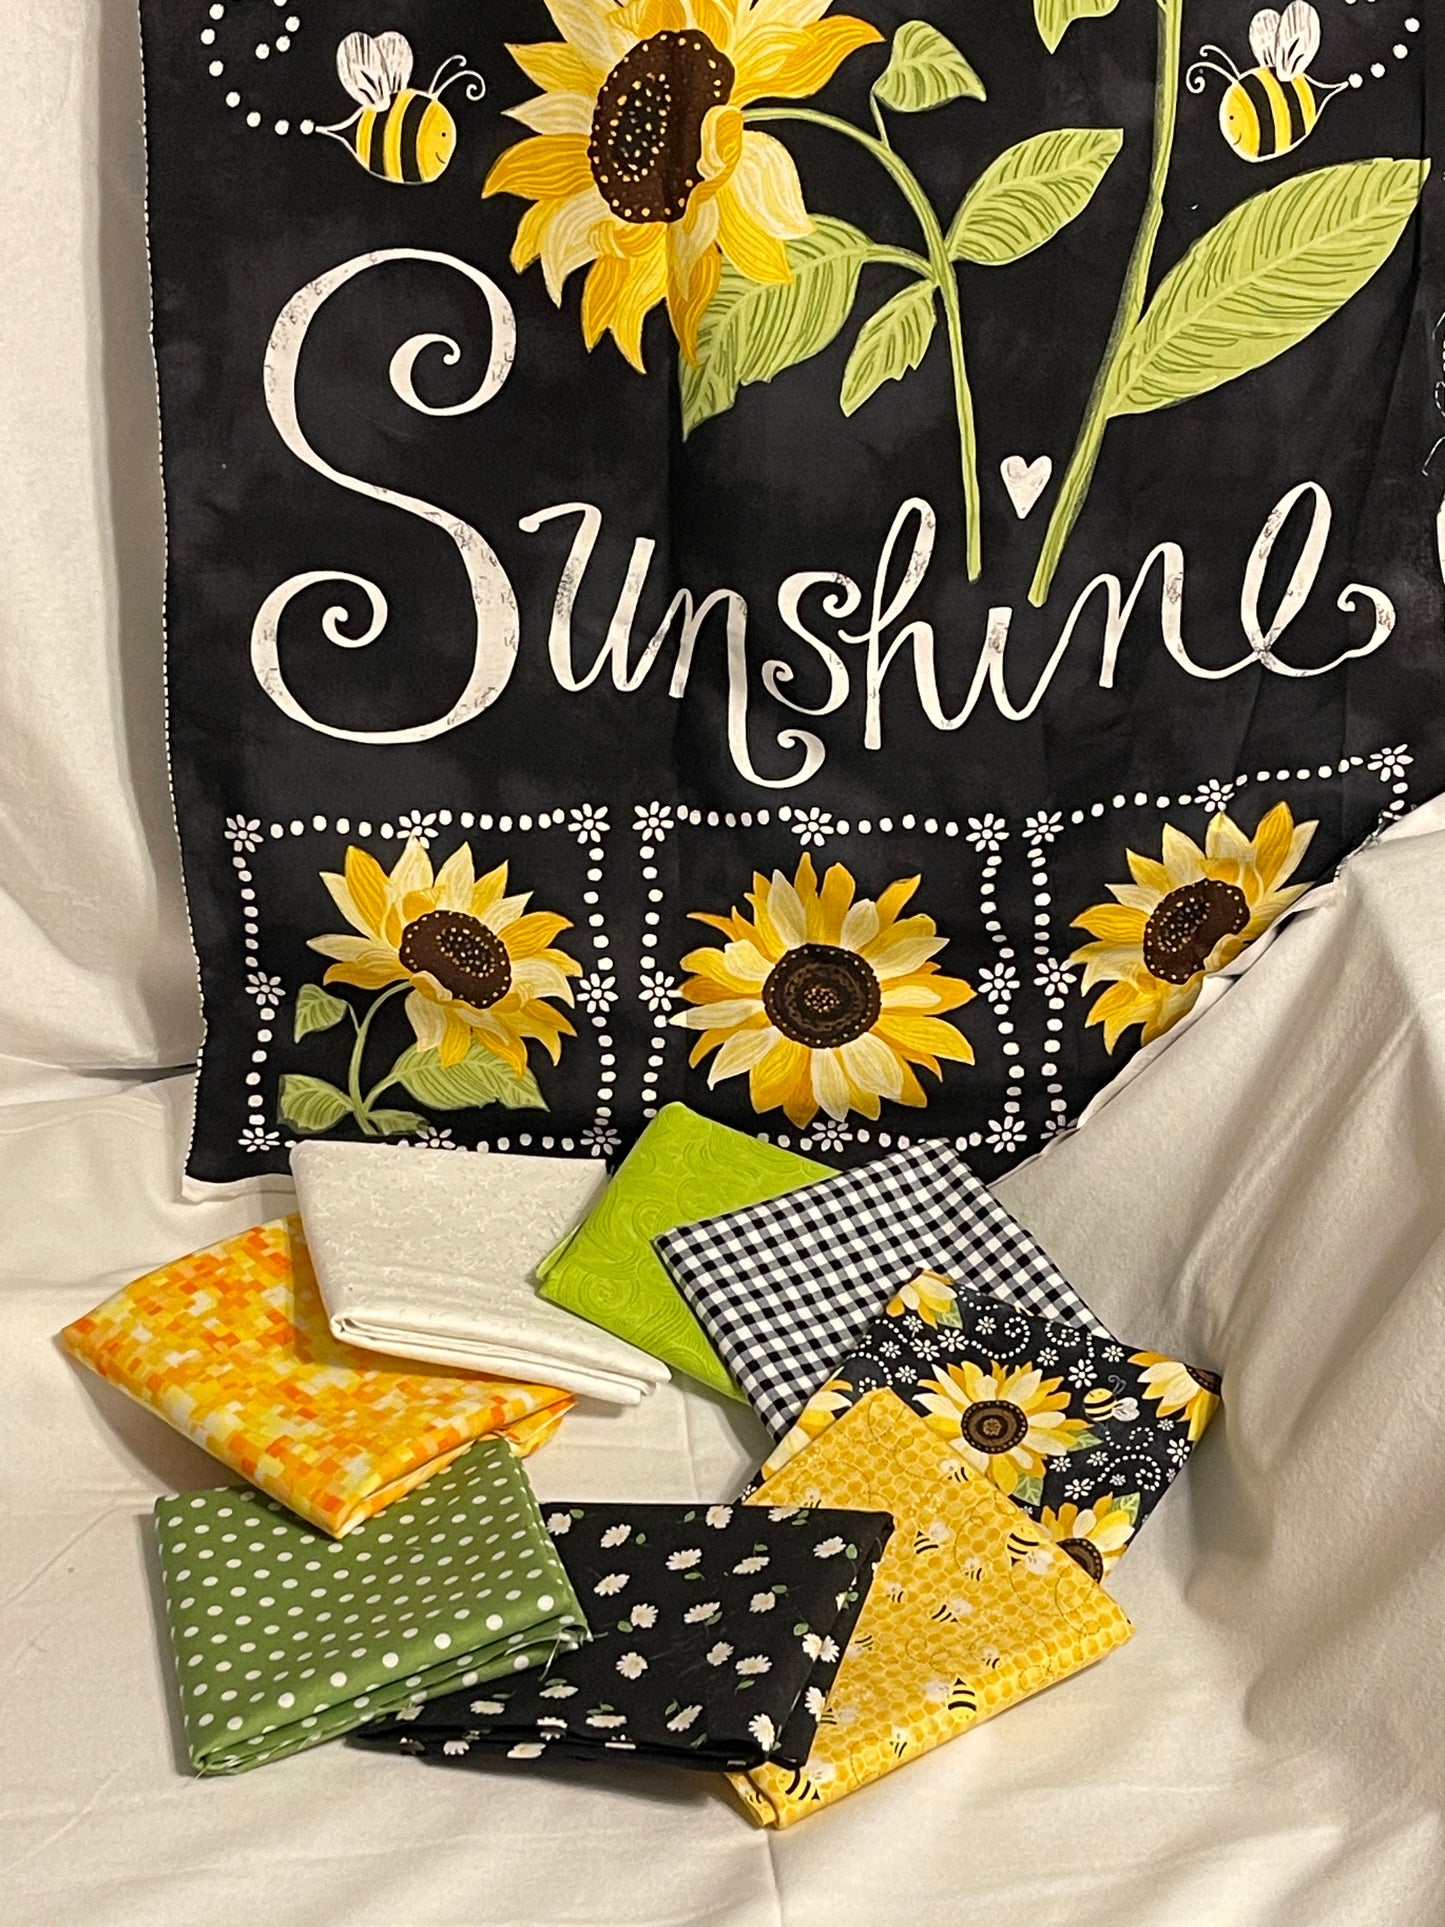 You are my Sunshine Fabric Fat Quarter Bundle, BeeLoved Fabric, Sunflower Panel & 8 FQs, Gail Cadden, Honeybee Fabric, Sunflower fabric